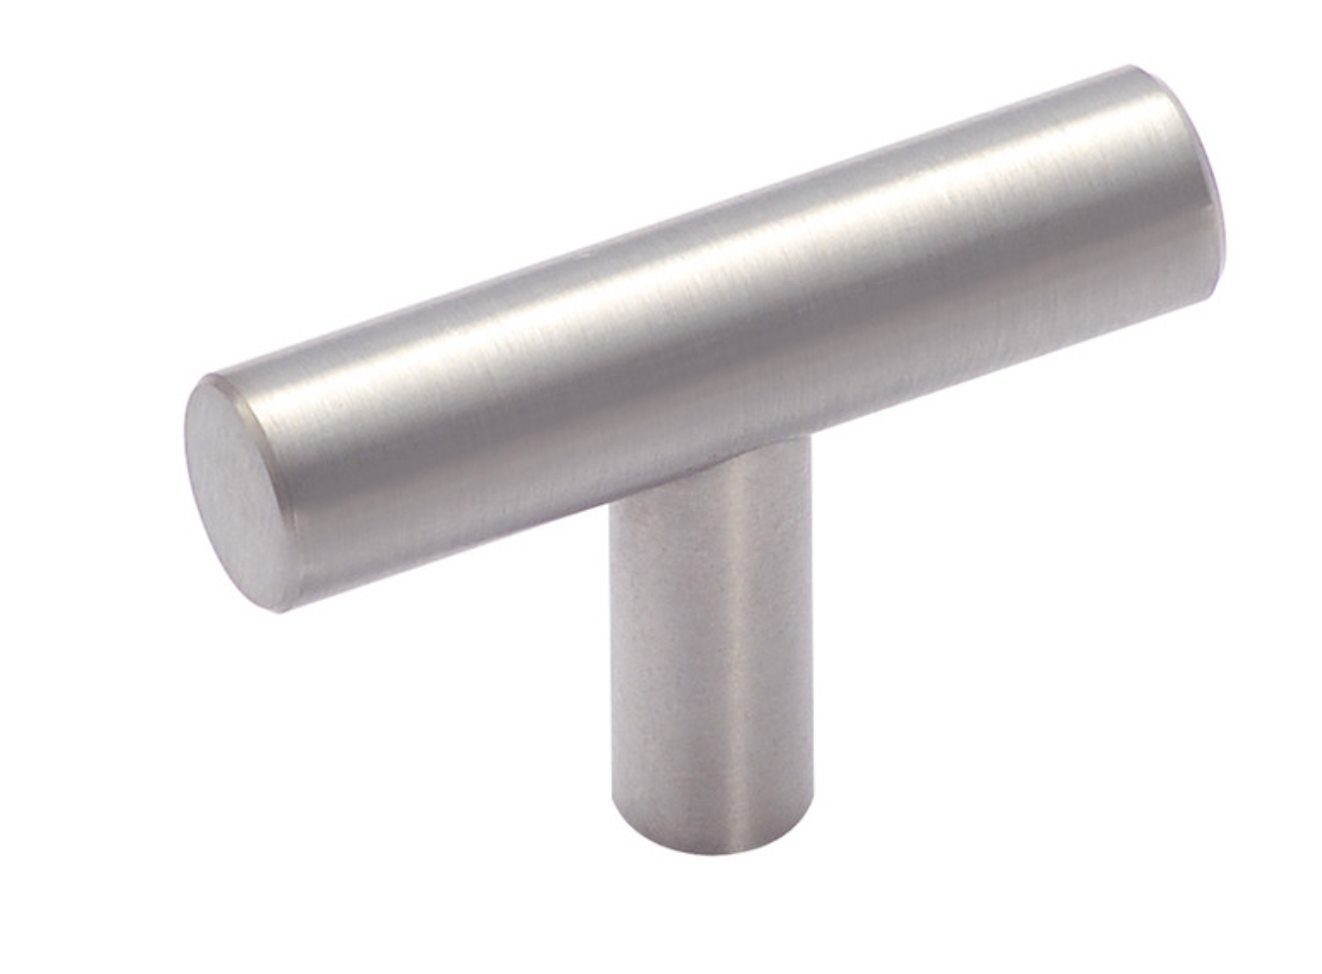 SOLID Stainless Steel Cabinet Knob T Bar Pulls - Superior to Regular Steel Pulls - Single Hole 1-15/16" Length